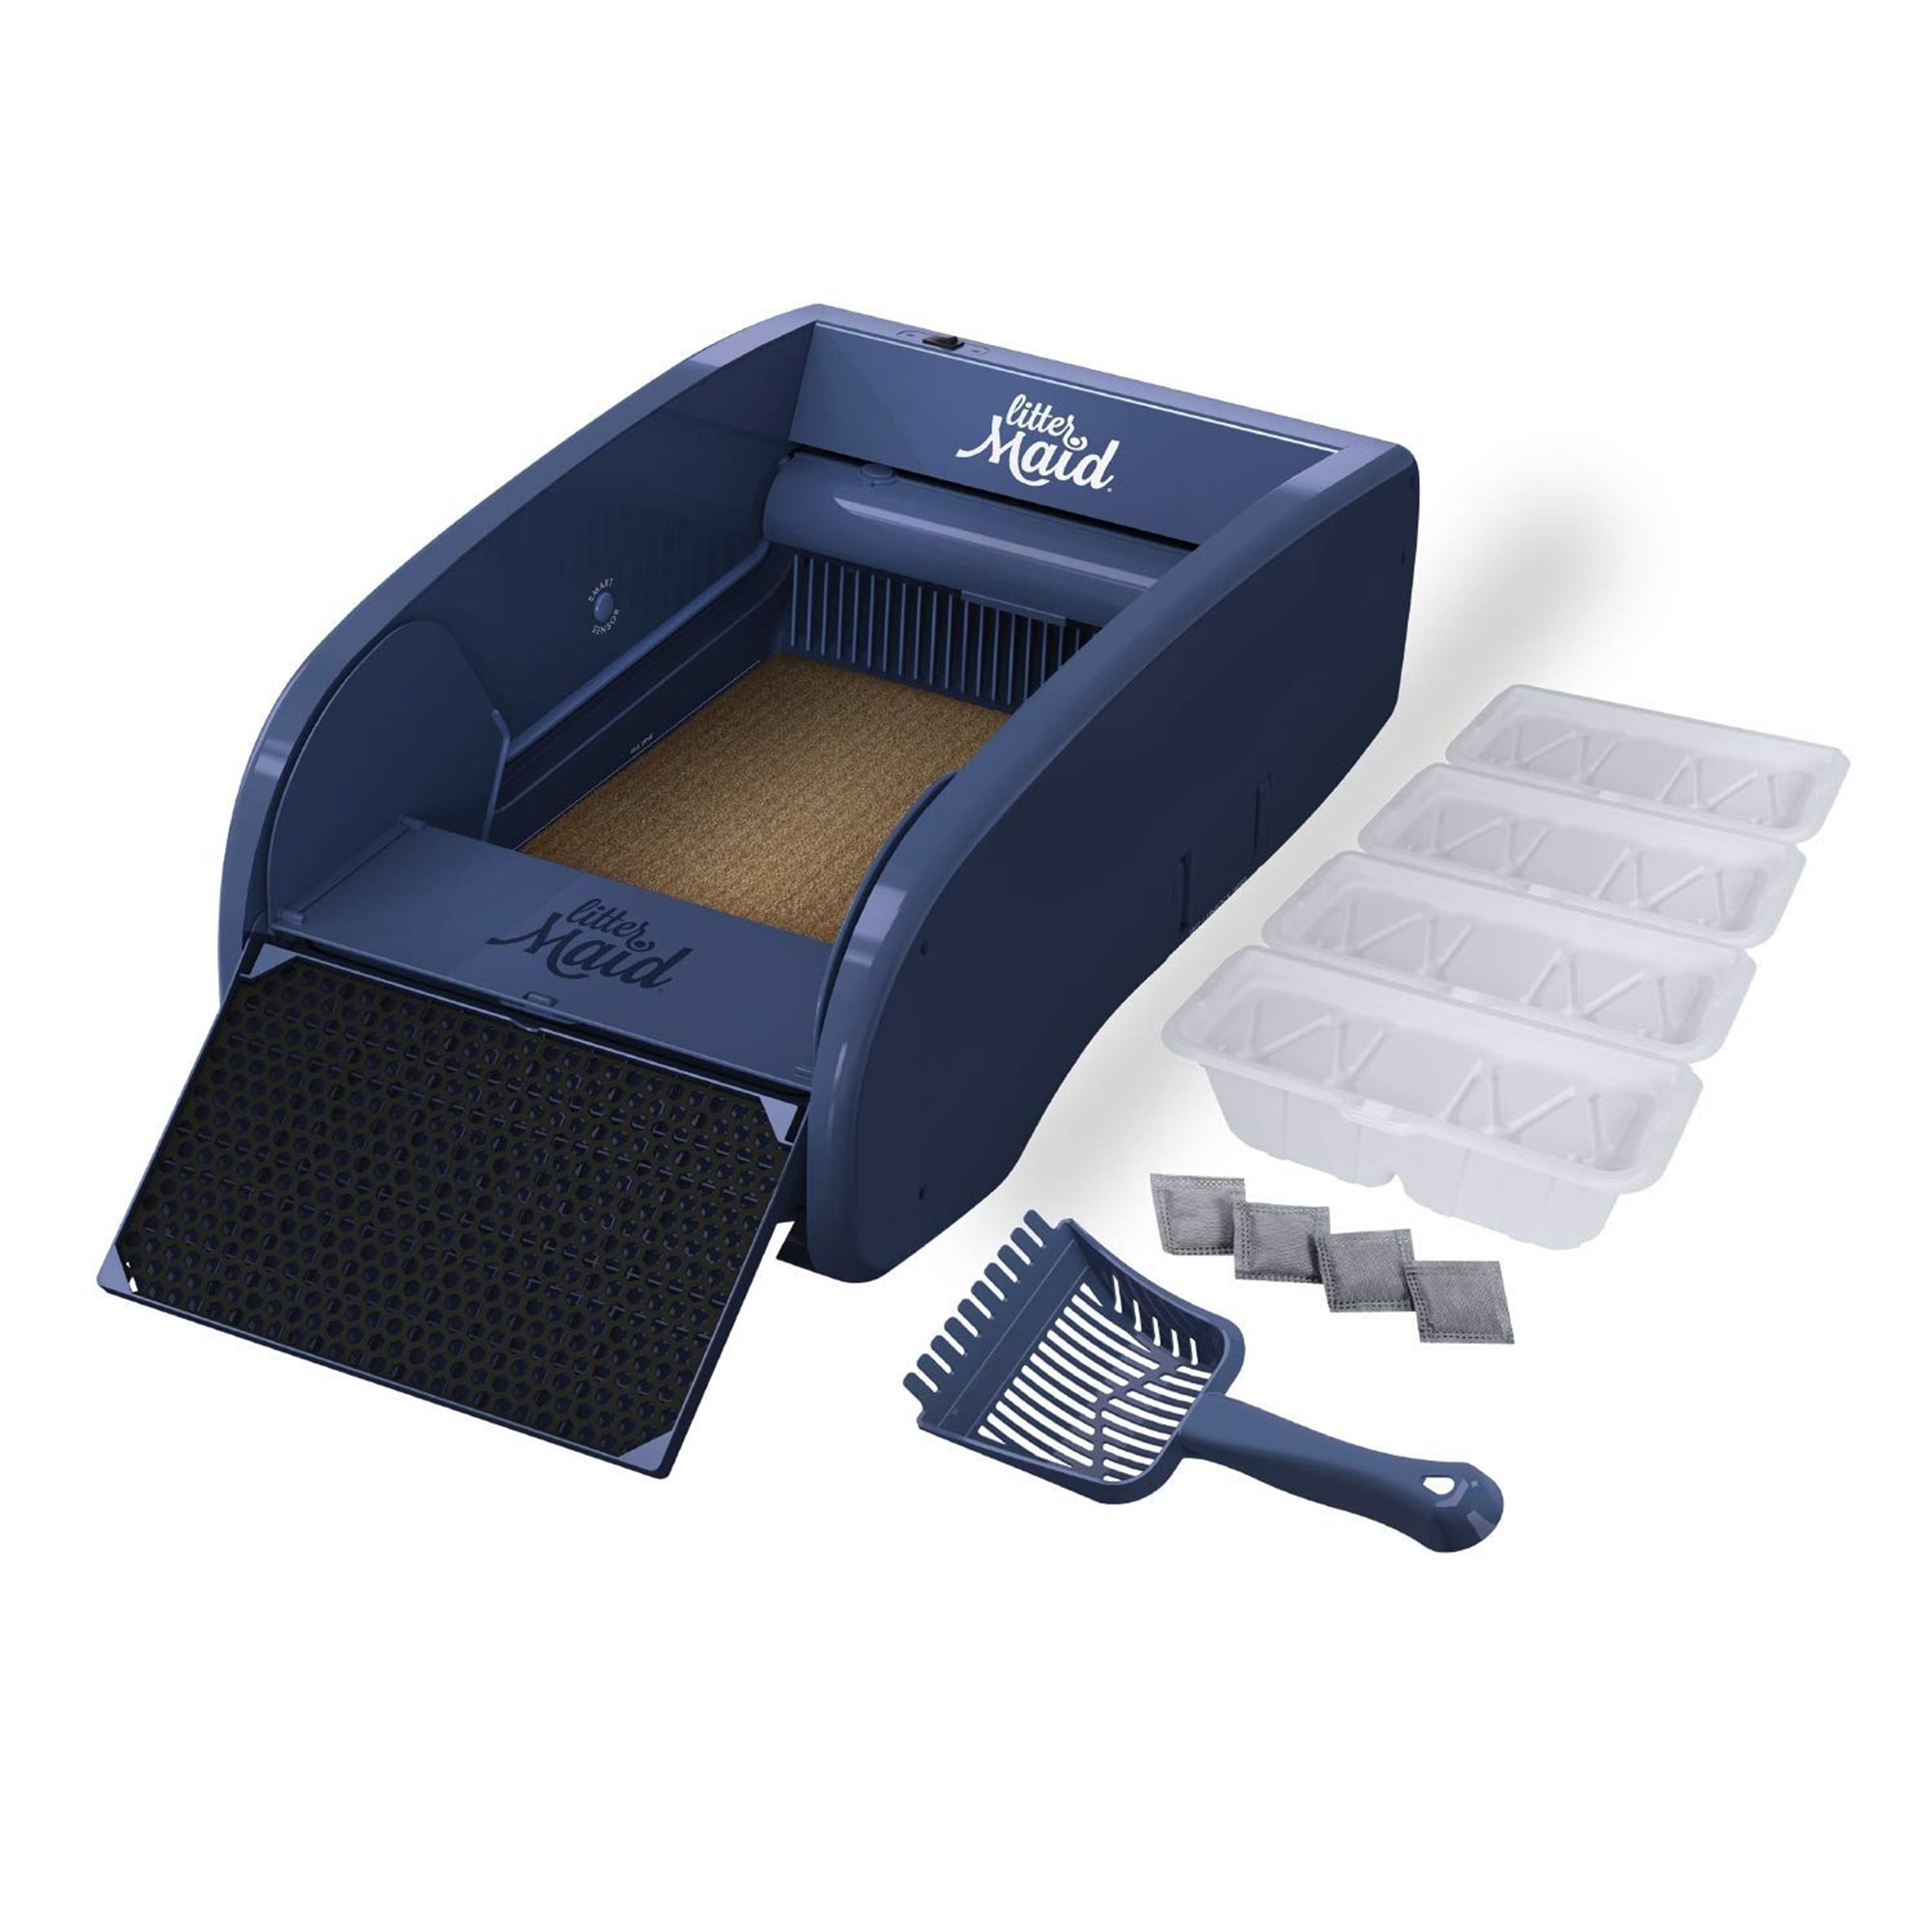 LitterMaid 3rd Edition MultiCat SelfCleaning Litter Box Petco